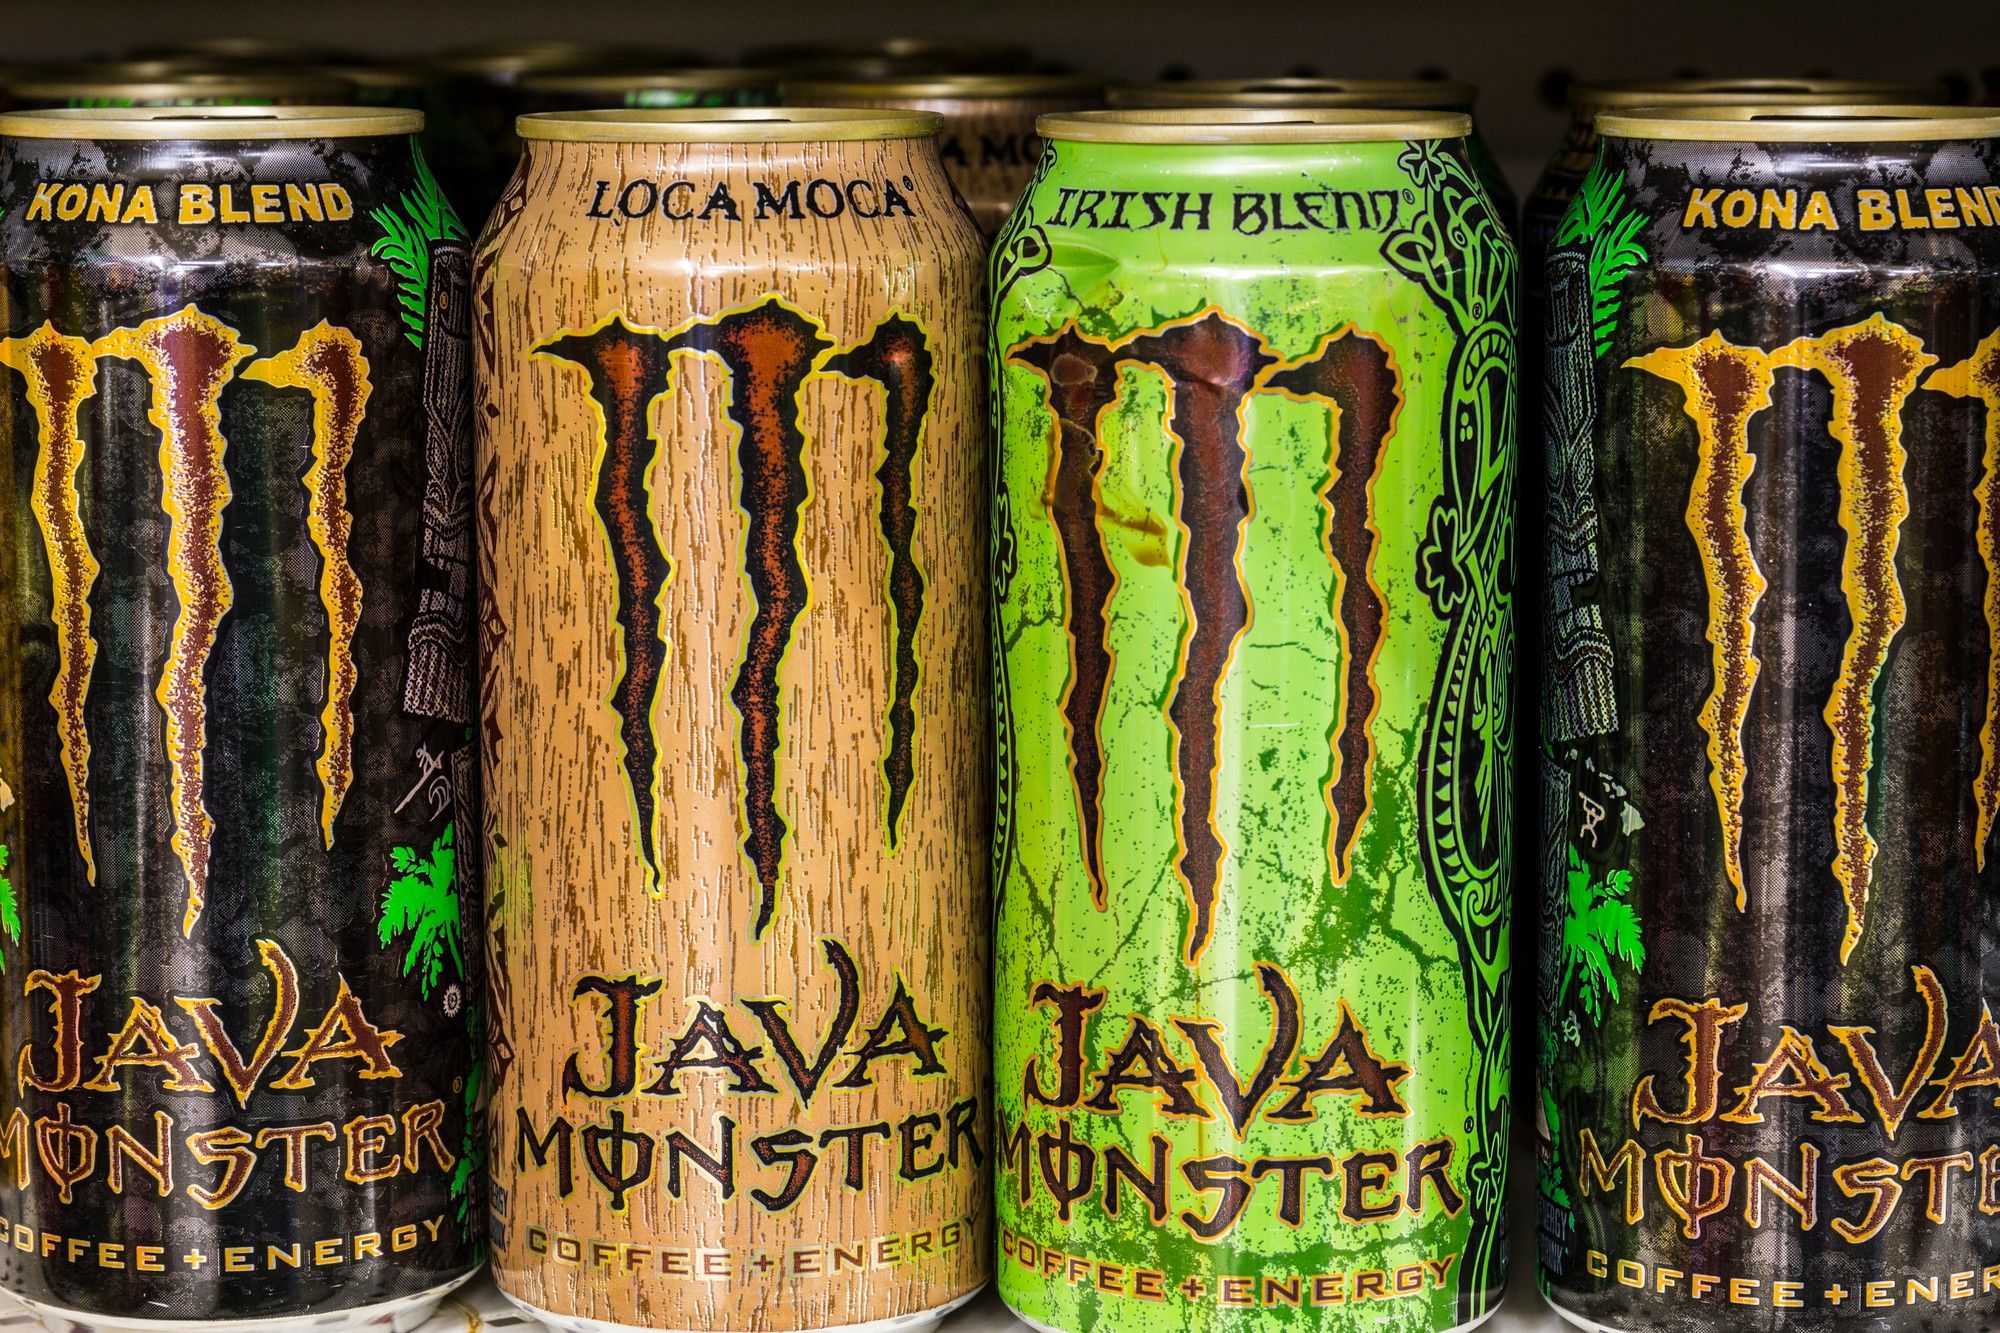 Vanilla Bean Not Among Monster Energy Drink Ingredients, Class Action  Lawsuit Says - Top Class Actions